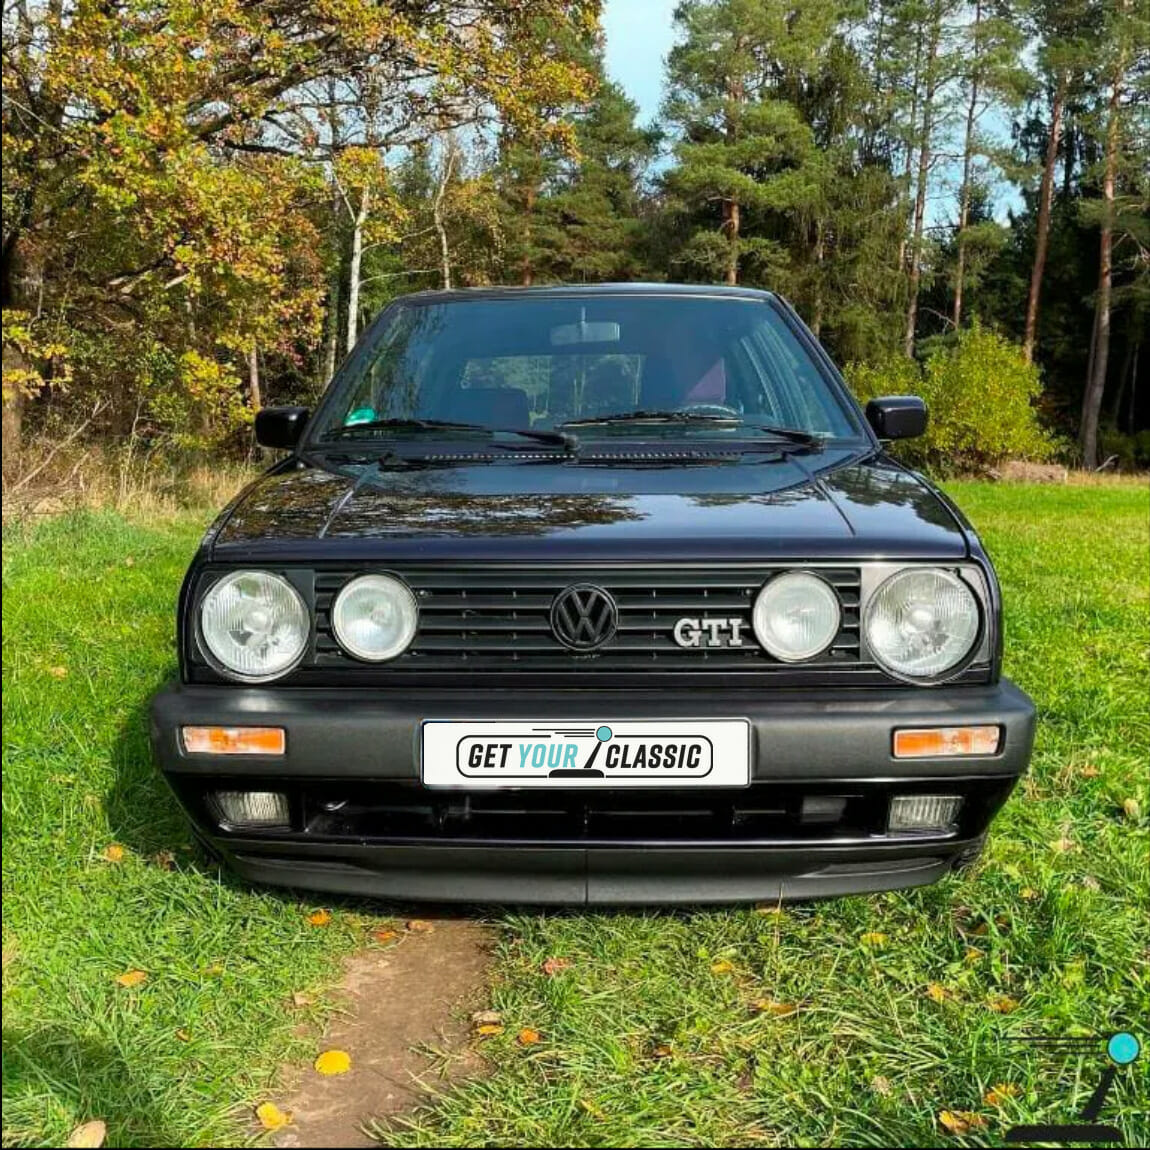 VW Golf 2 GTi Fire and Ice - bid now